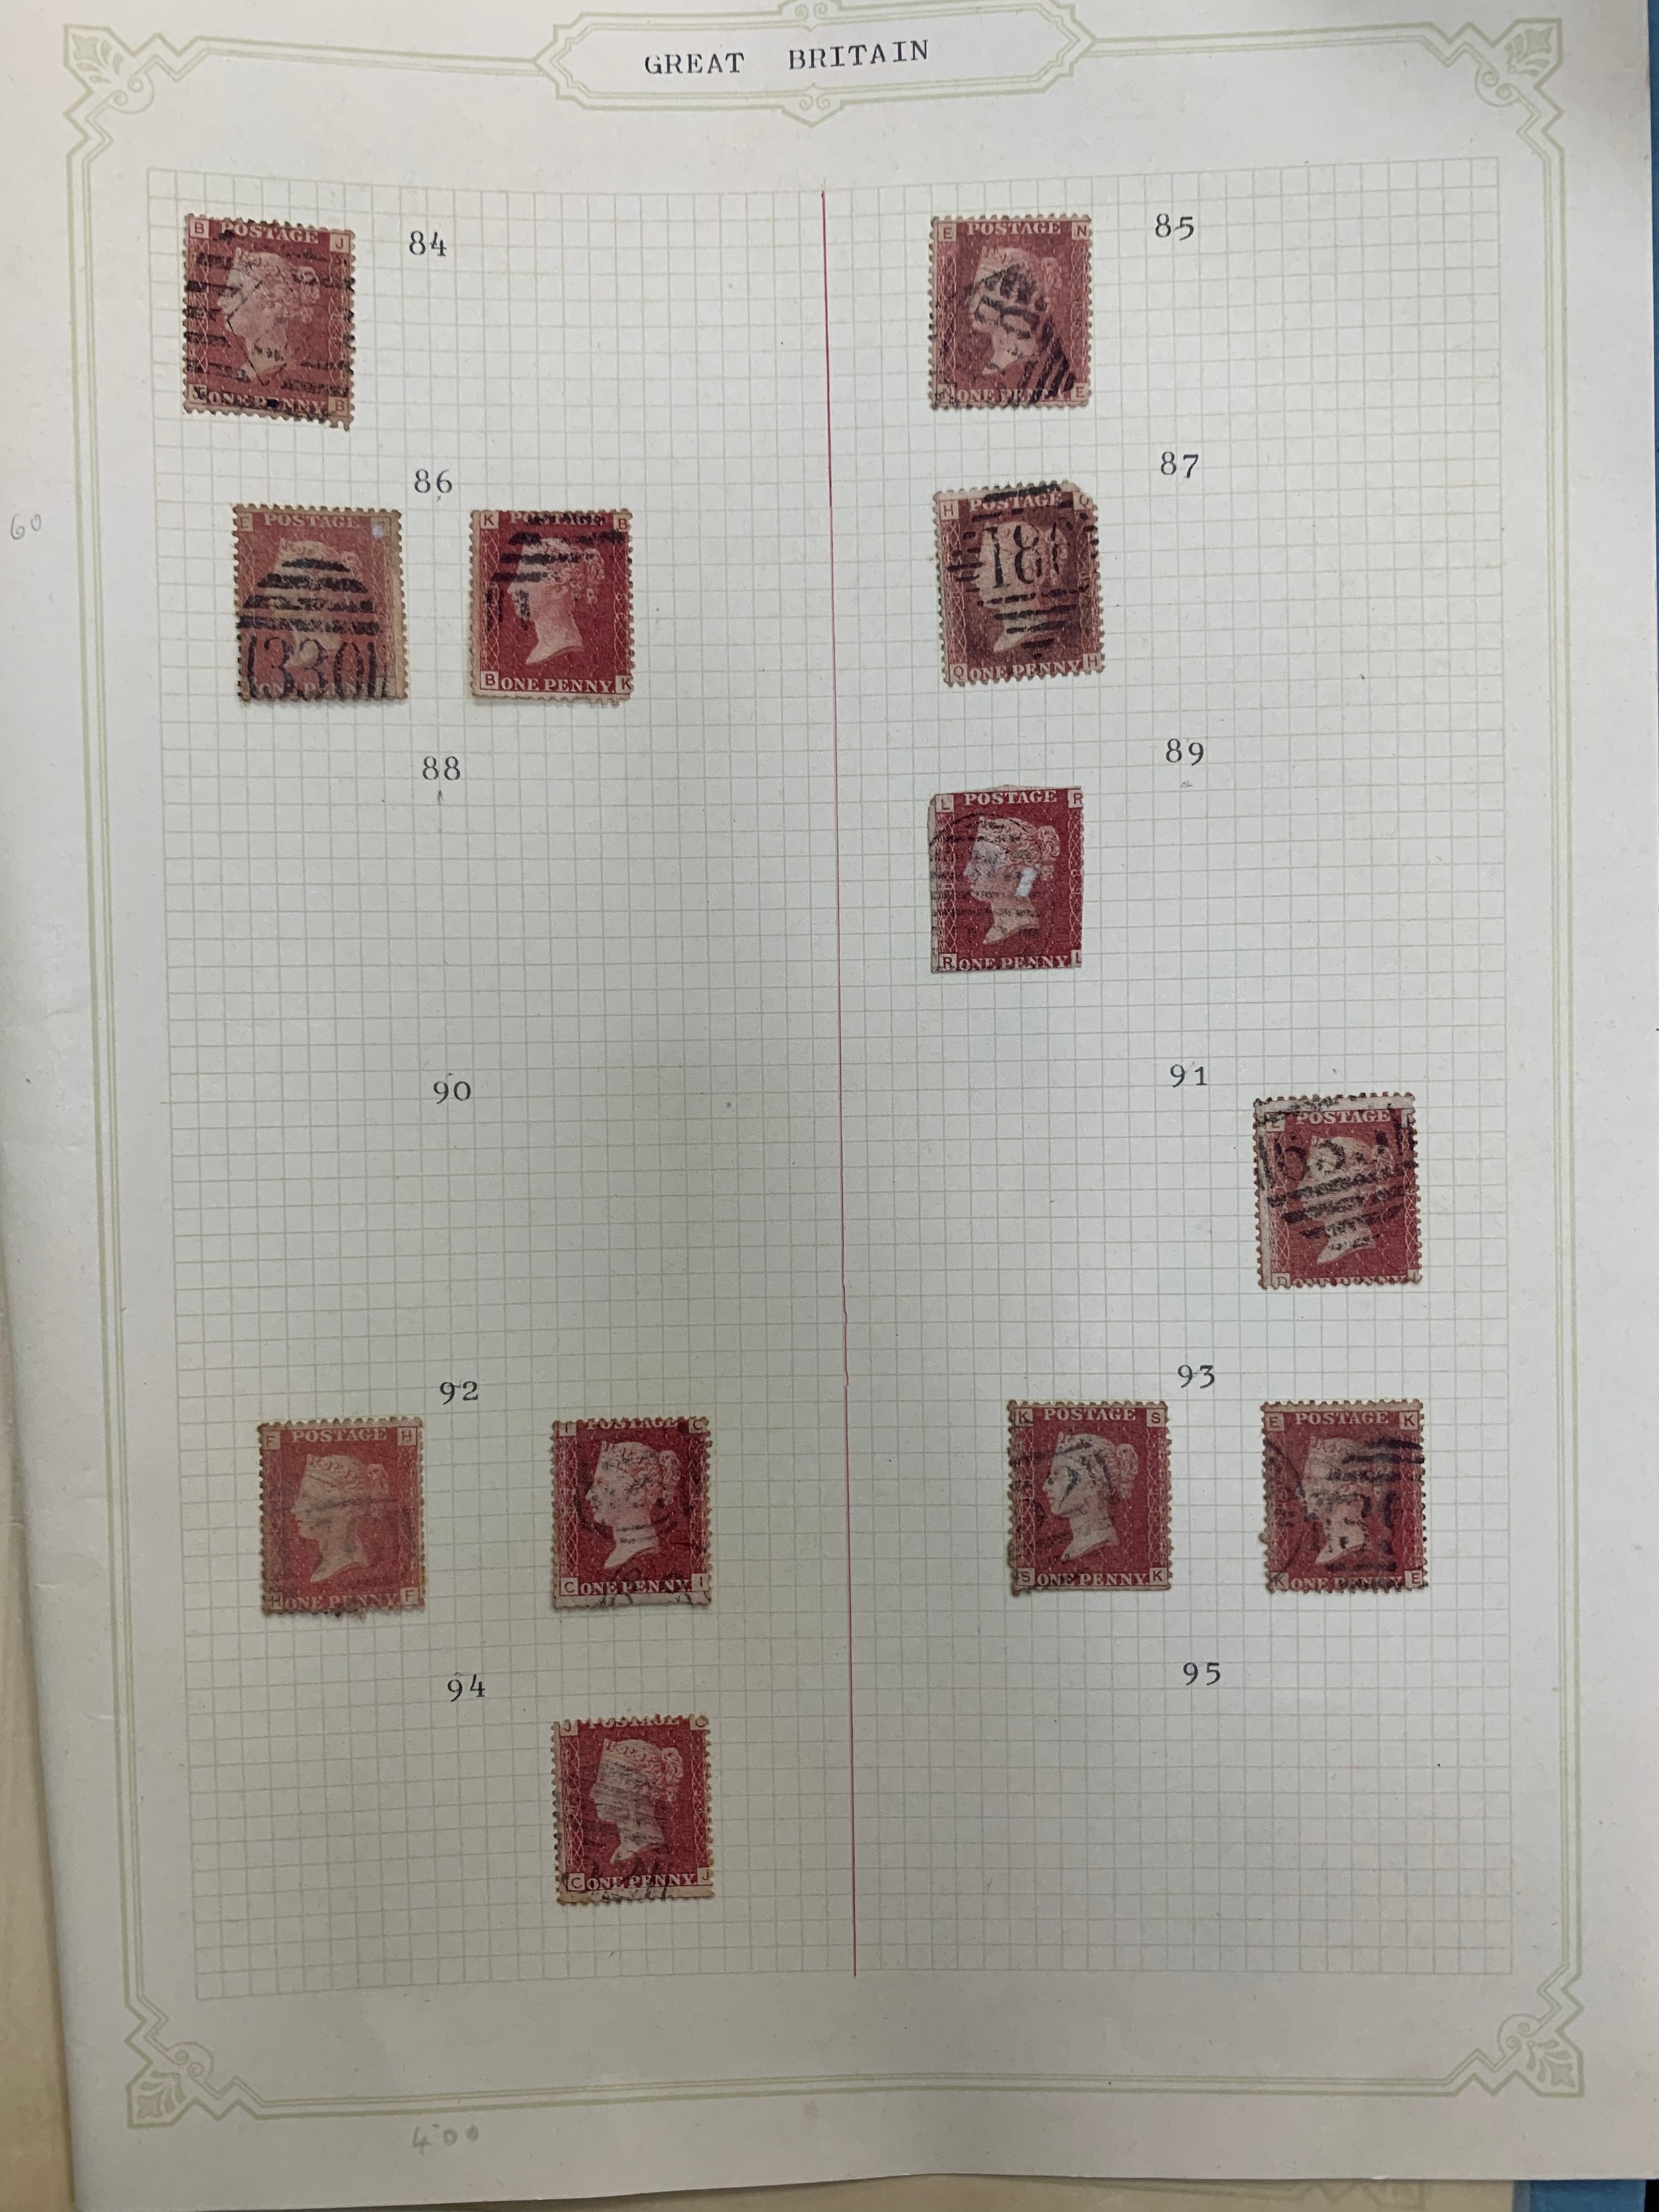 Great Britain, 1858-64 annotated and well-laid out collection of 1d Penny Reds FU from plate 73 to - Image 2 of 12